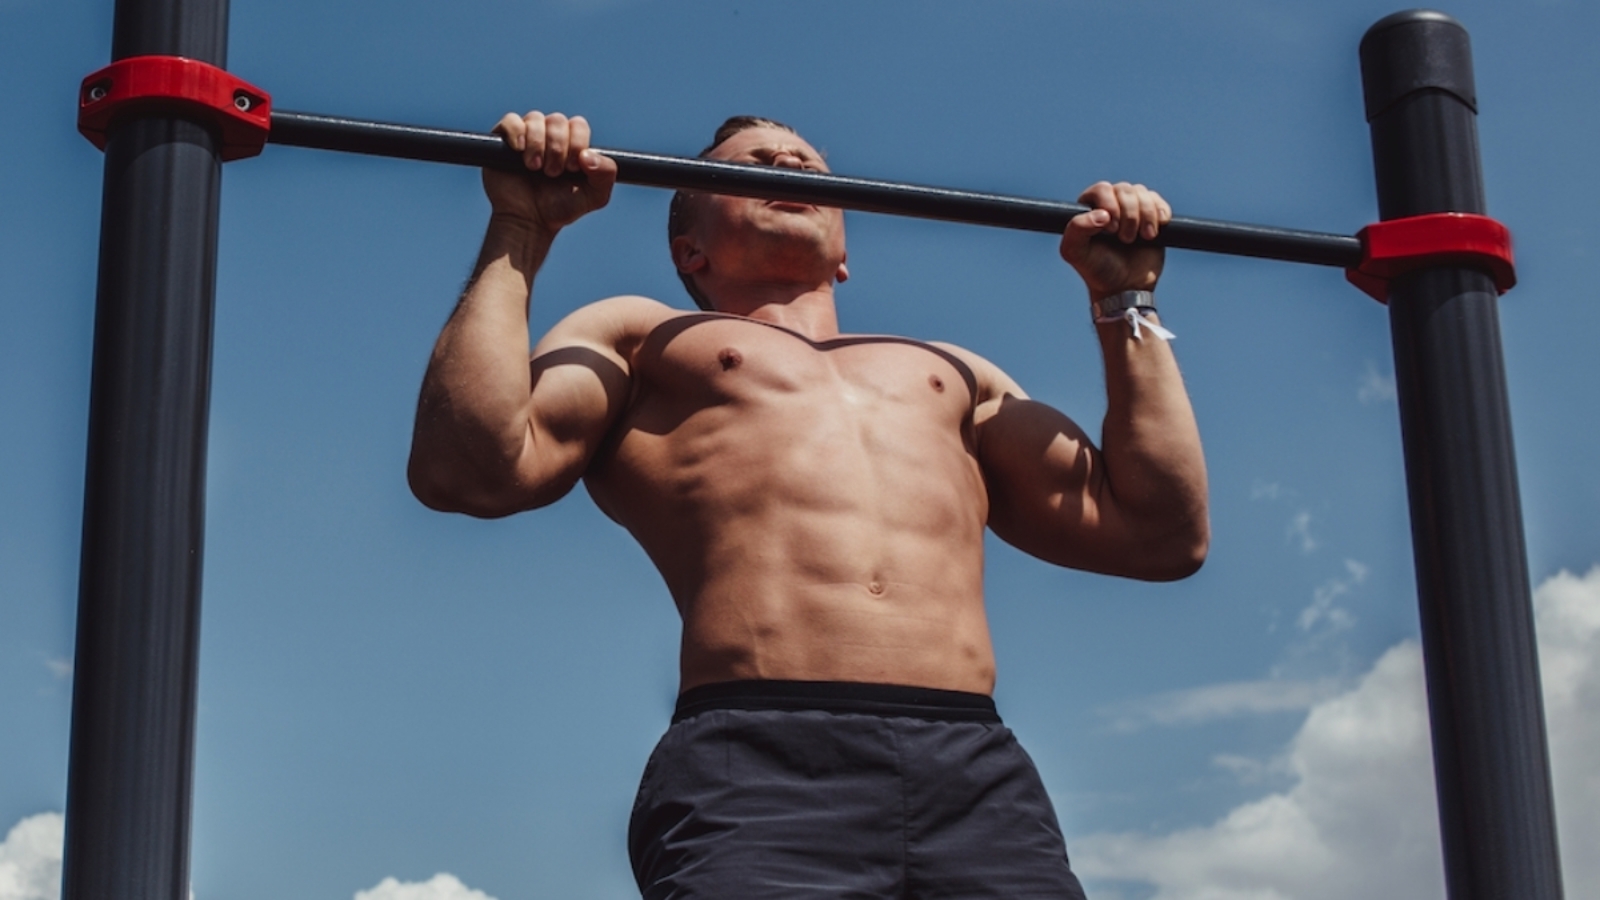 How to Build Muscle and Strength With Calisthenics Training